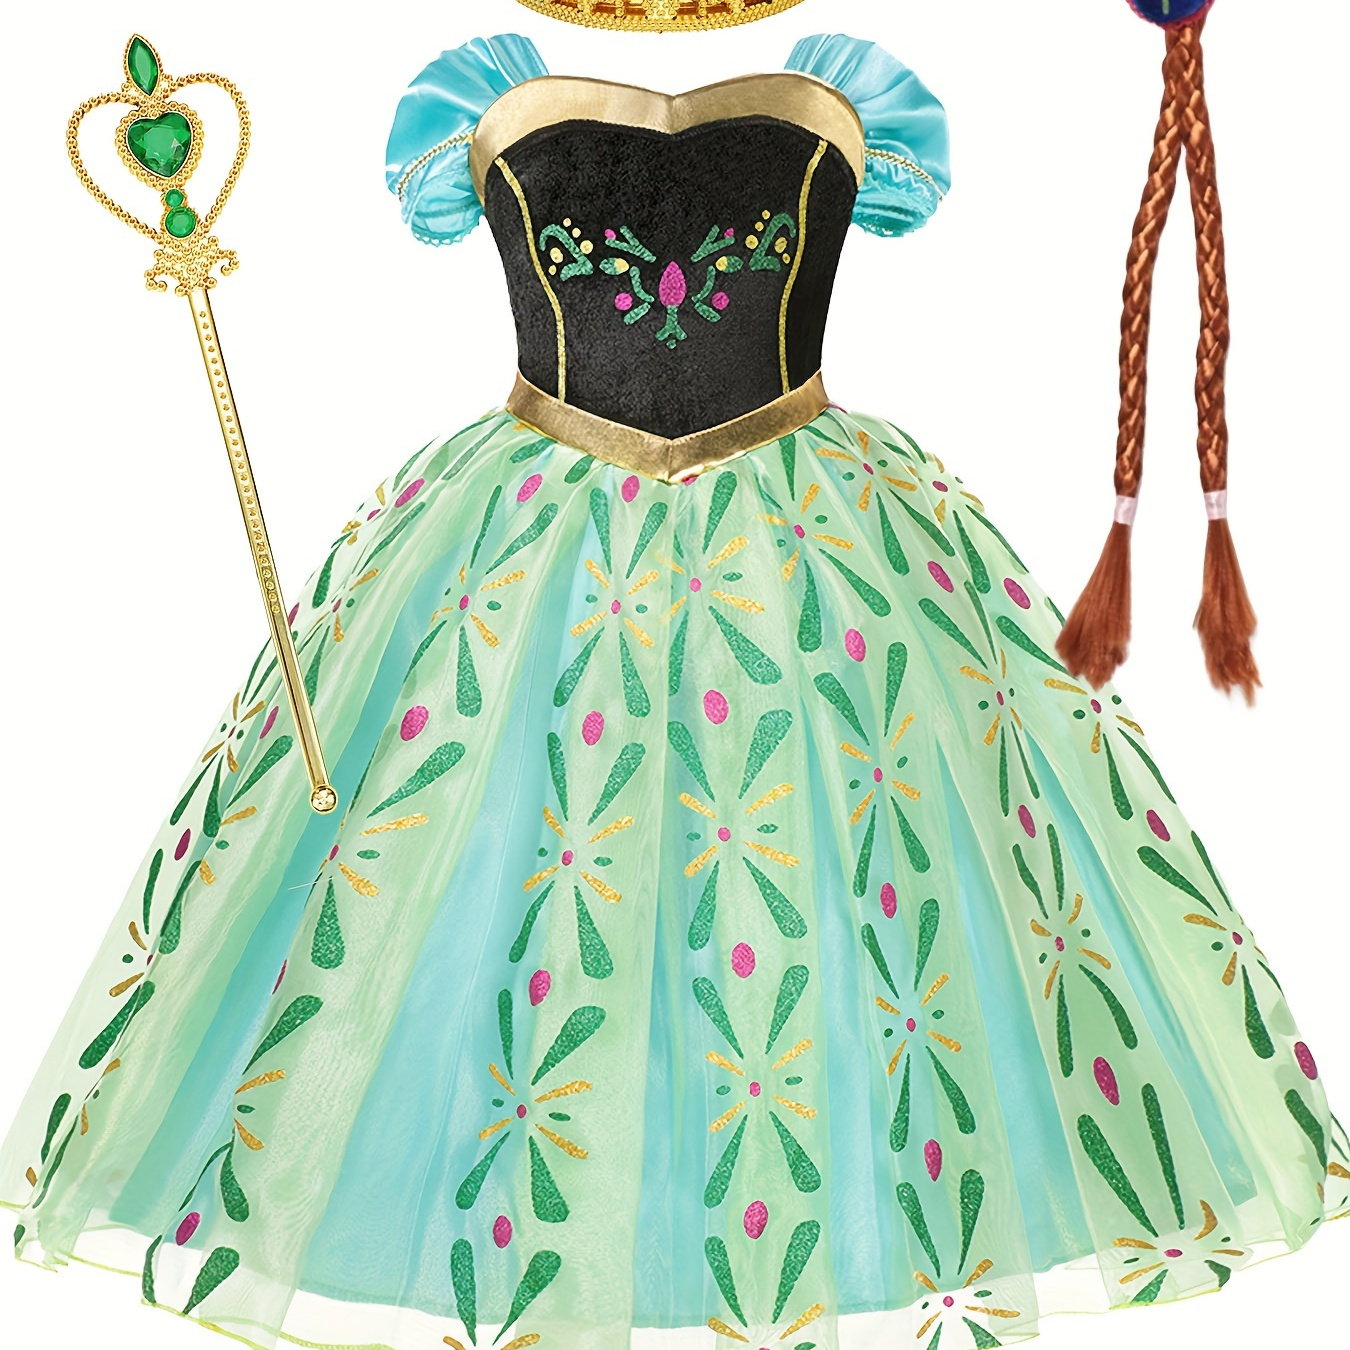 

Dreamy Girls Splicing Princess Mesh Dress Girl's Dress Up For Carnival Party Performance Gift